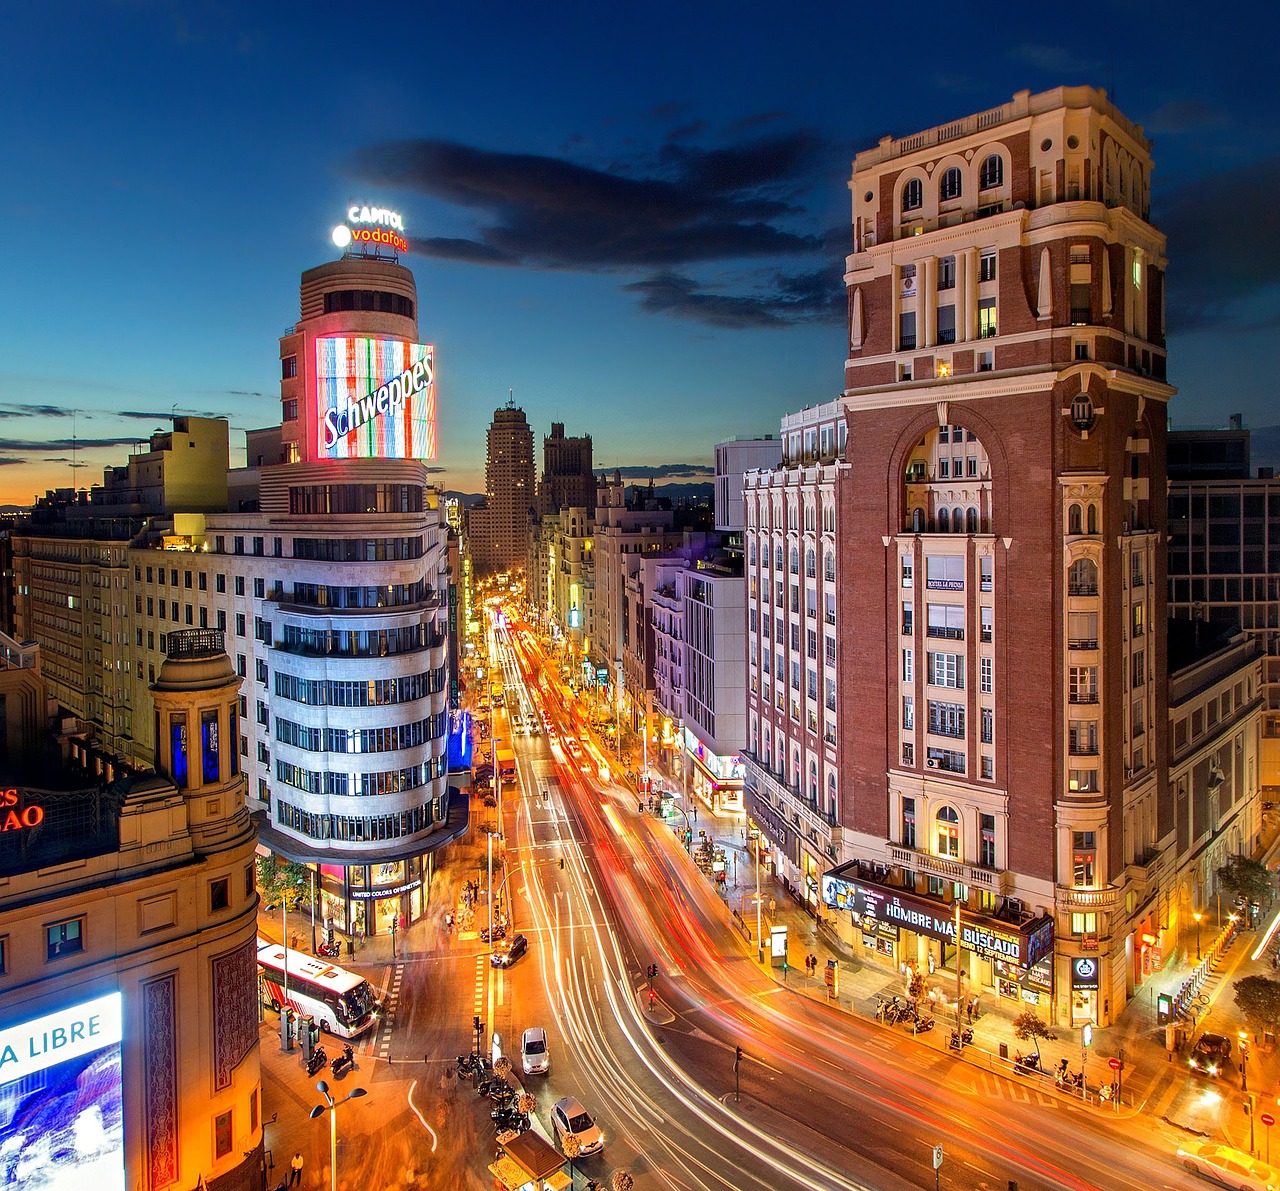 Art, History, and Spanish Cuisine in Madrid